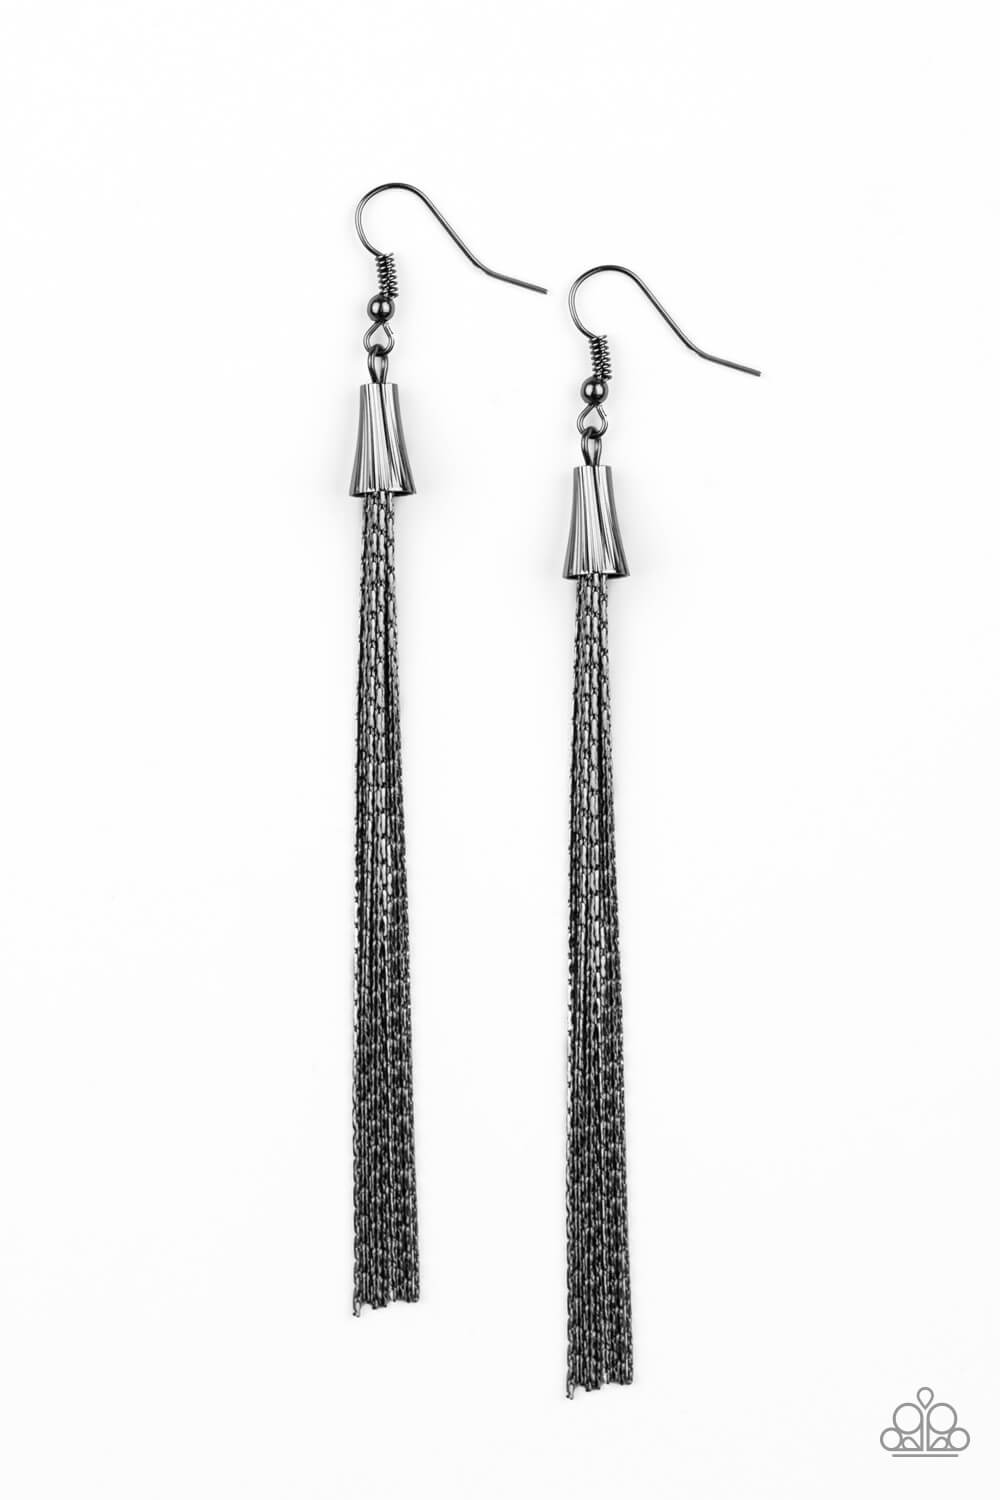 Shimmery Streamers - Black Gunmetal Earrings - Life of the Party Exclusive - Princess Glam Shop